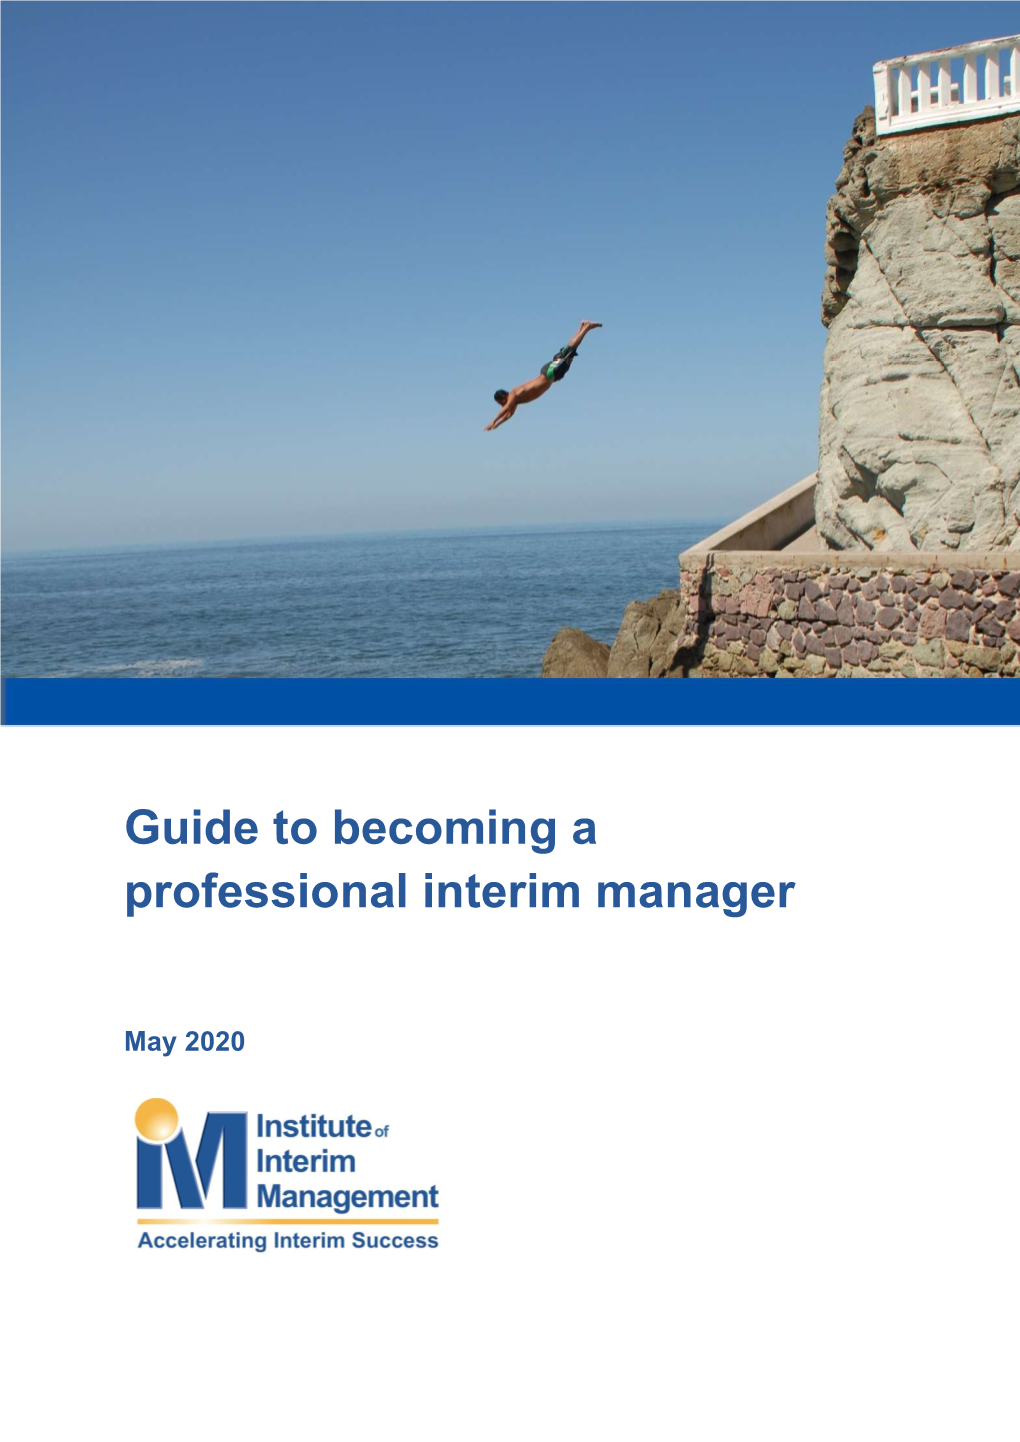 Guide to Becoming a Professional Interim Manager